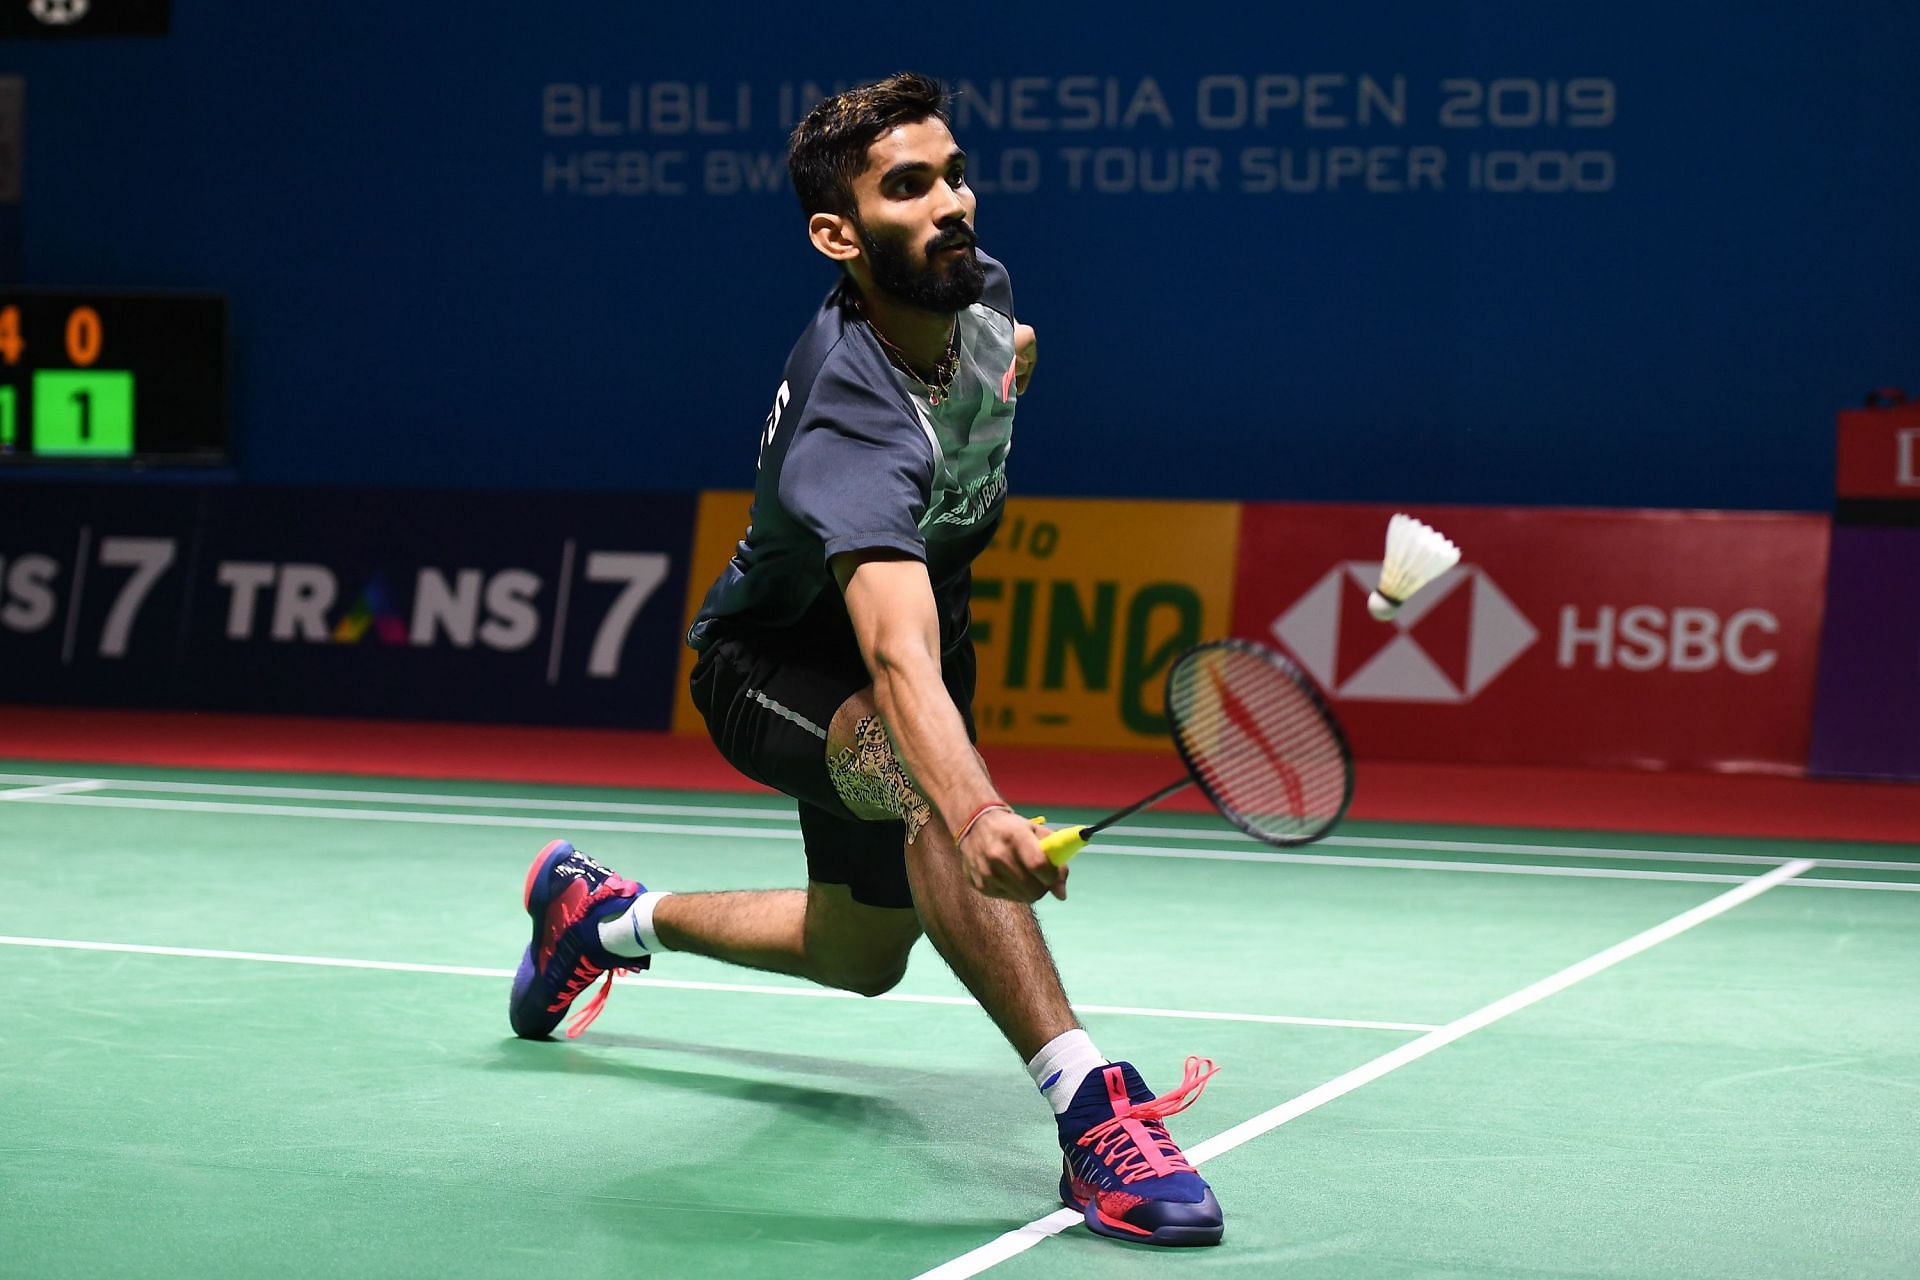 Srikanth&#039;s best performance at the BWF World Championships prior to this was a quarterfinal finish in 2017.